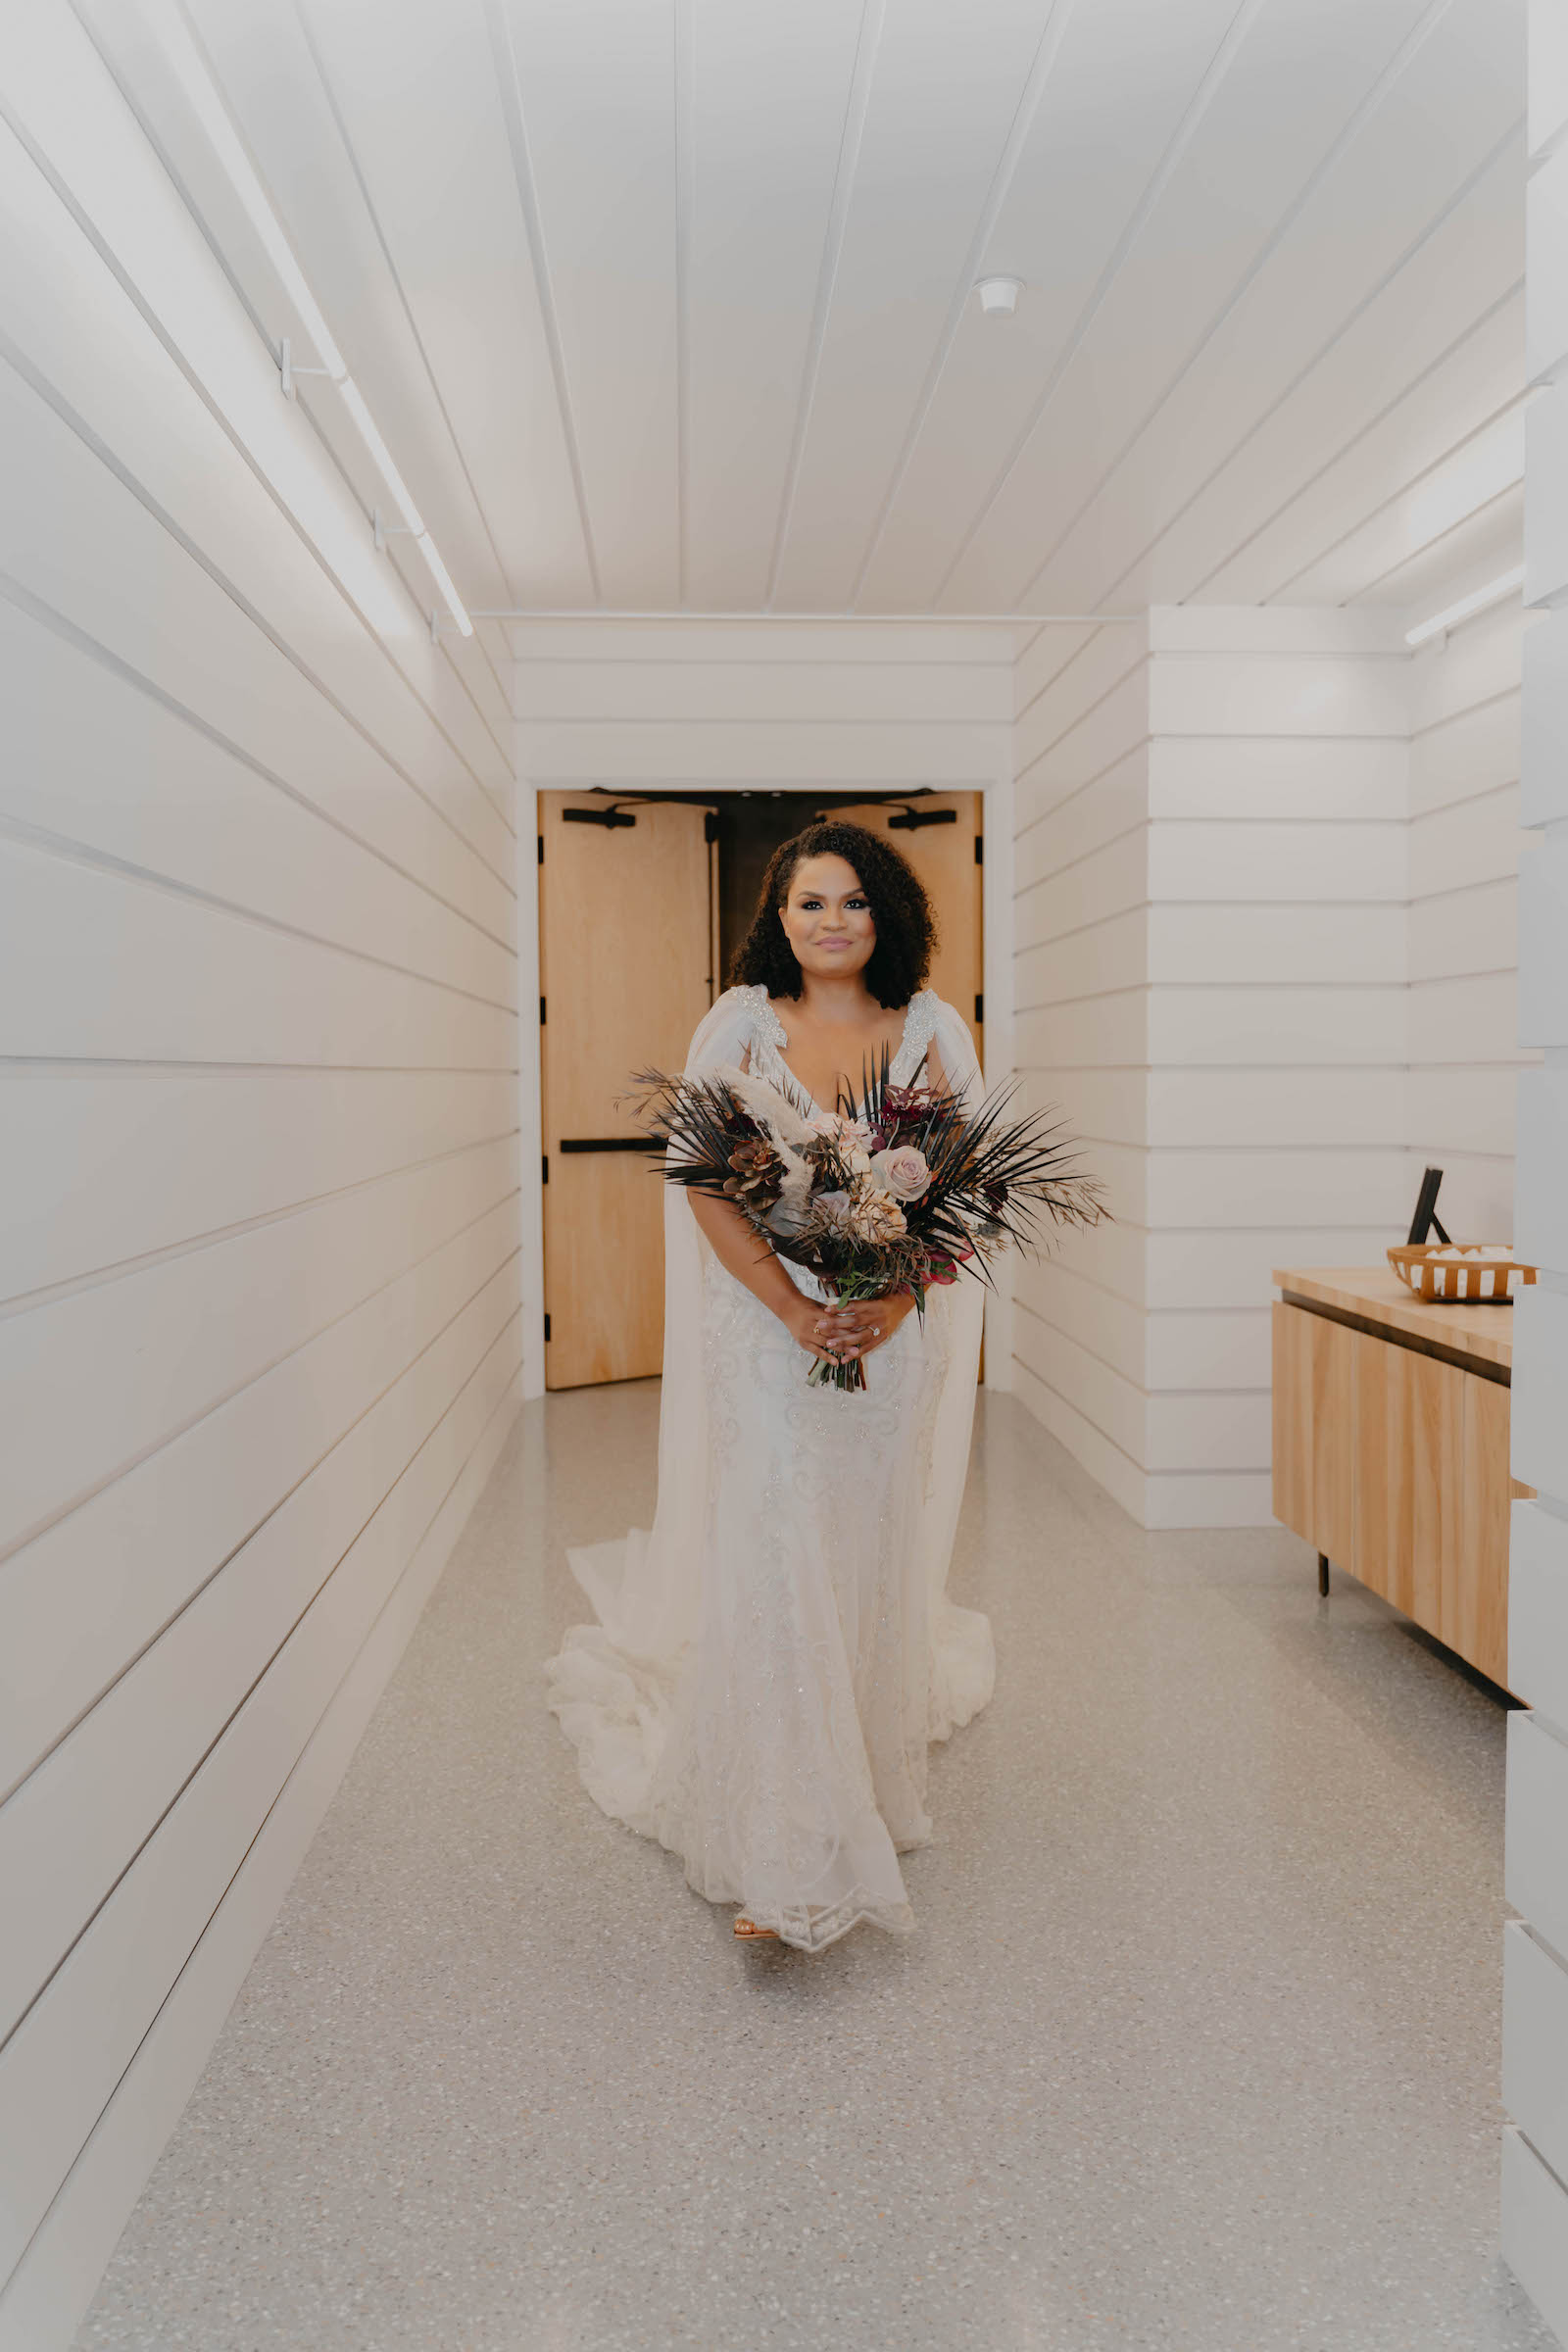 Indoor Bridal Portrait in Tampa Wedding Venue Hyde House | Illusion Lace Embroidered Beaded V Neck Wedding Dress Bridal Gown with Sheer Tulle Cape Sleeves by Designer Amalia Carrara Bridal | Boho Moody Wild Bridal Bouquet with Deep Green Leaves, Cafe au Lait Roses and Deep Red Burgundy Scabiosa and Orchids